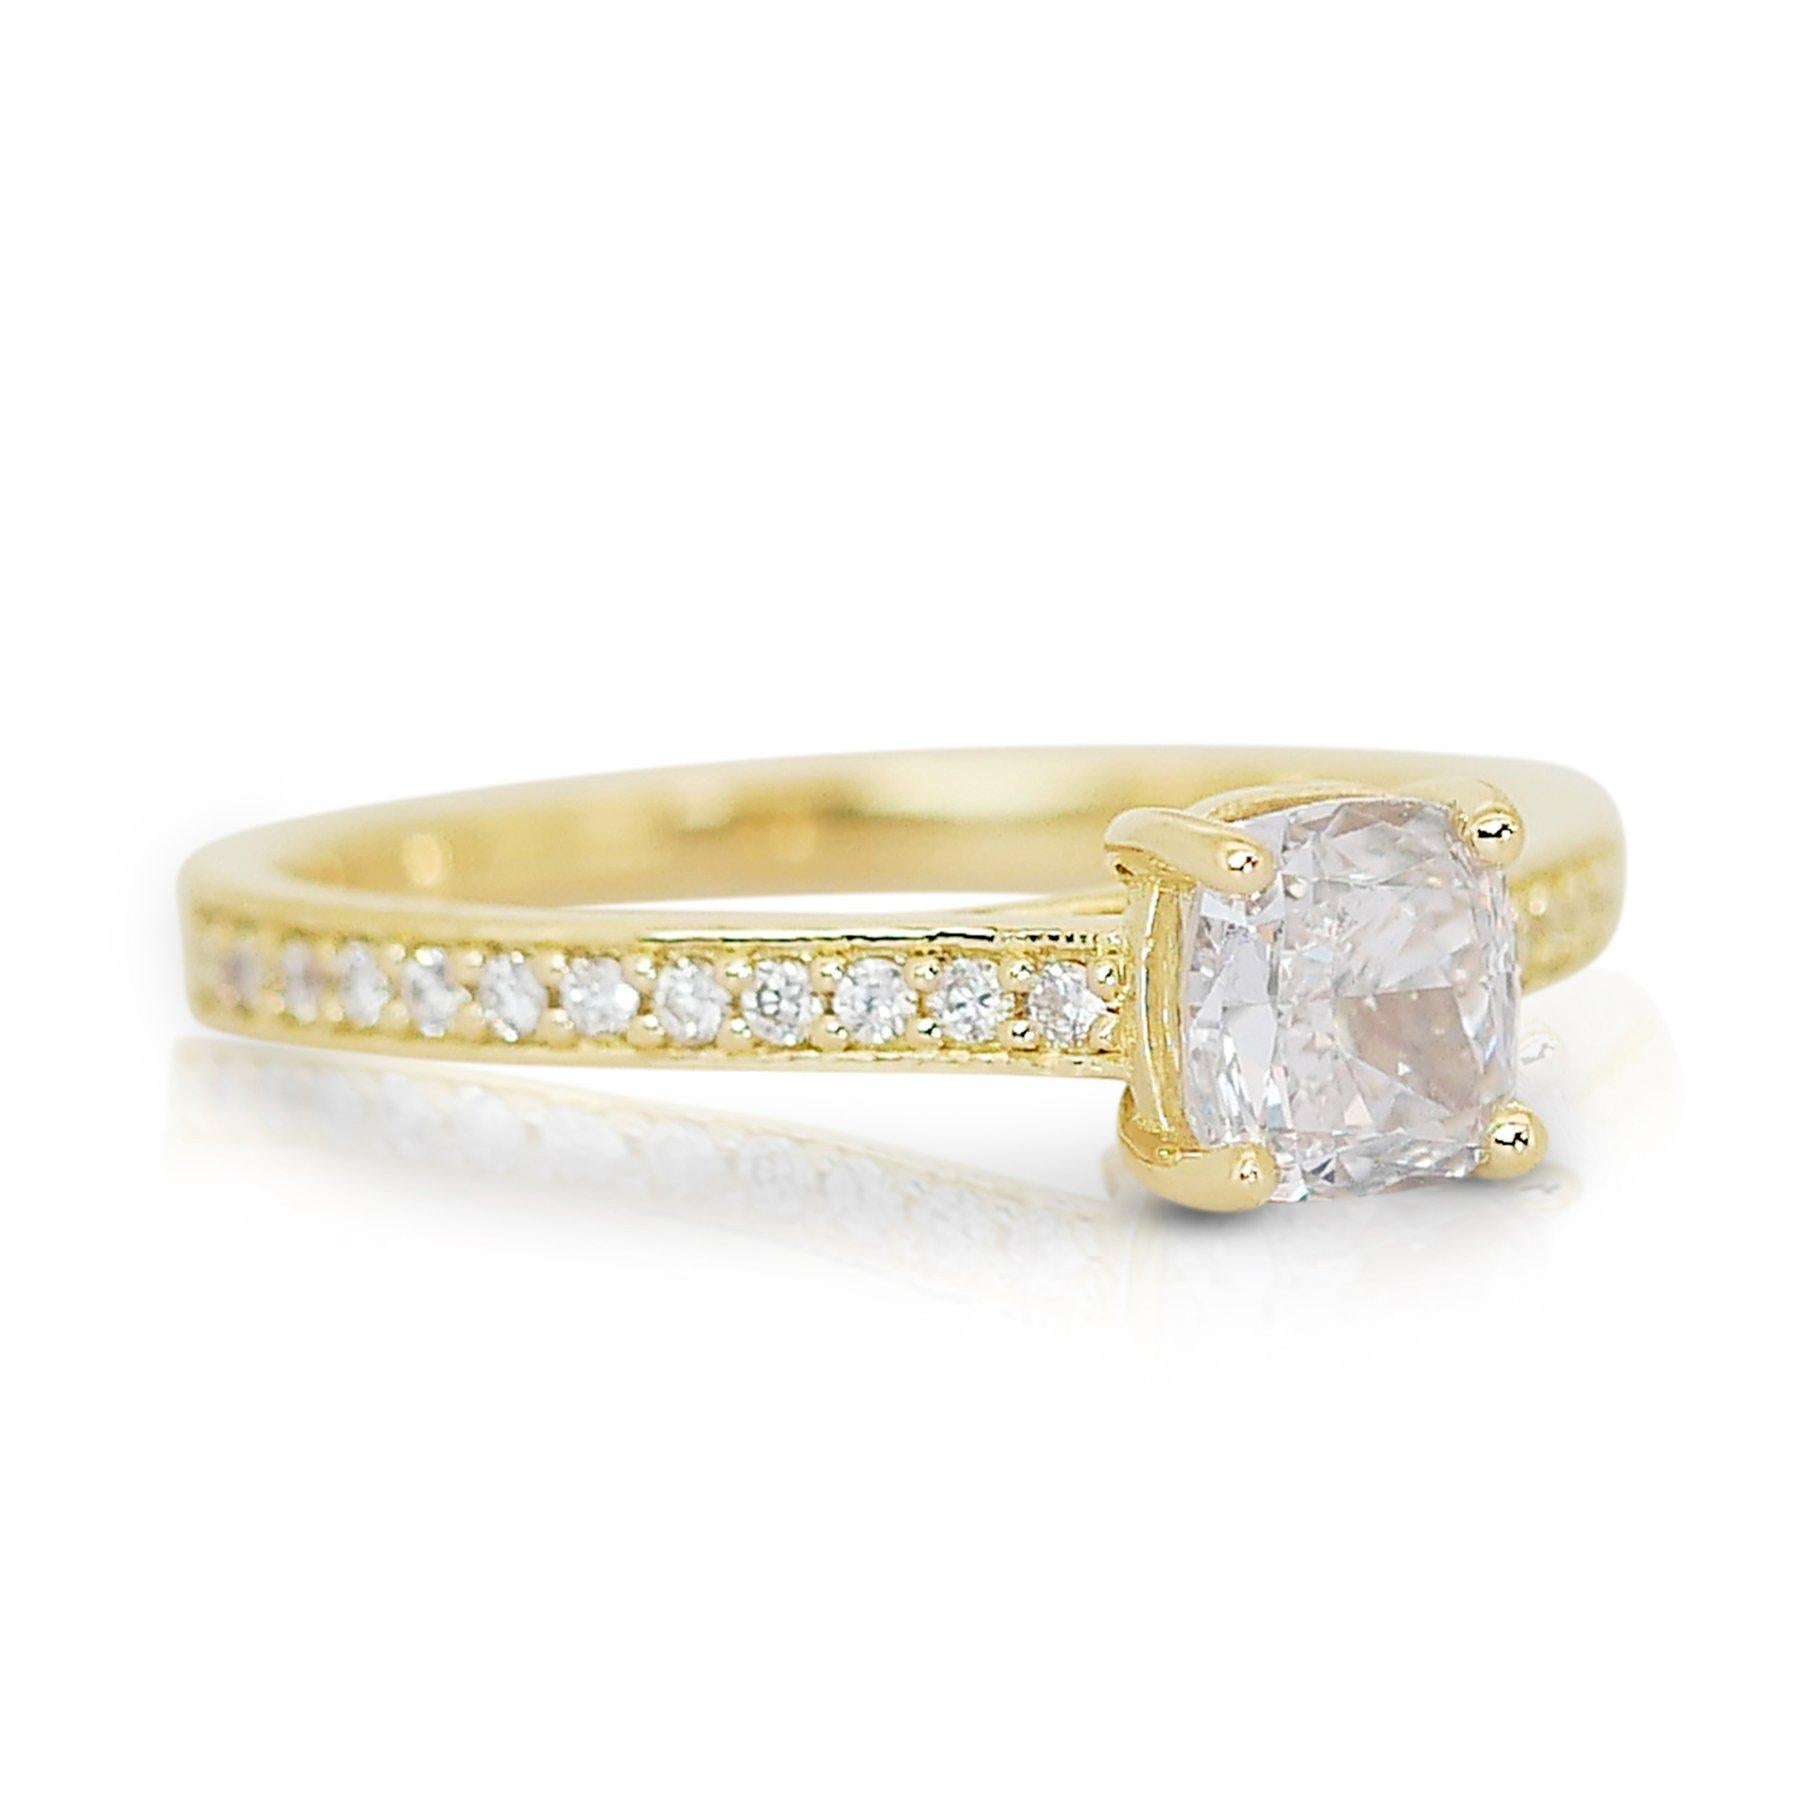 Luminous 1.17ct Diamond Pave Ring in 18k Yellow Gold – GIA Certified

Crafted with precision, this elegant 18k yellow gold pave ring features a 1.00-carat cushion-cut diamond. The center stone is complemented by a sparkling halo of 24 round